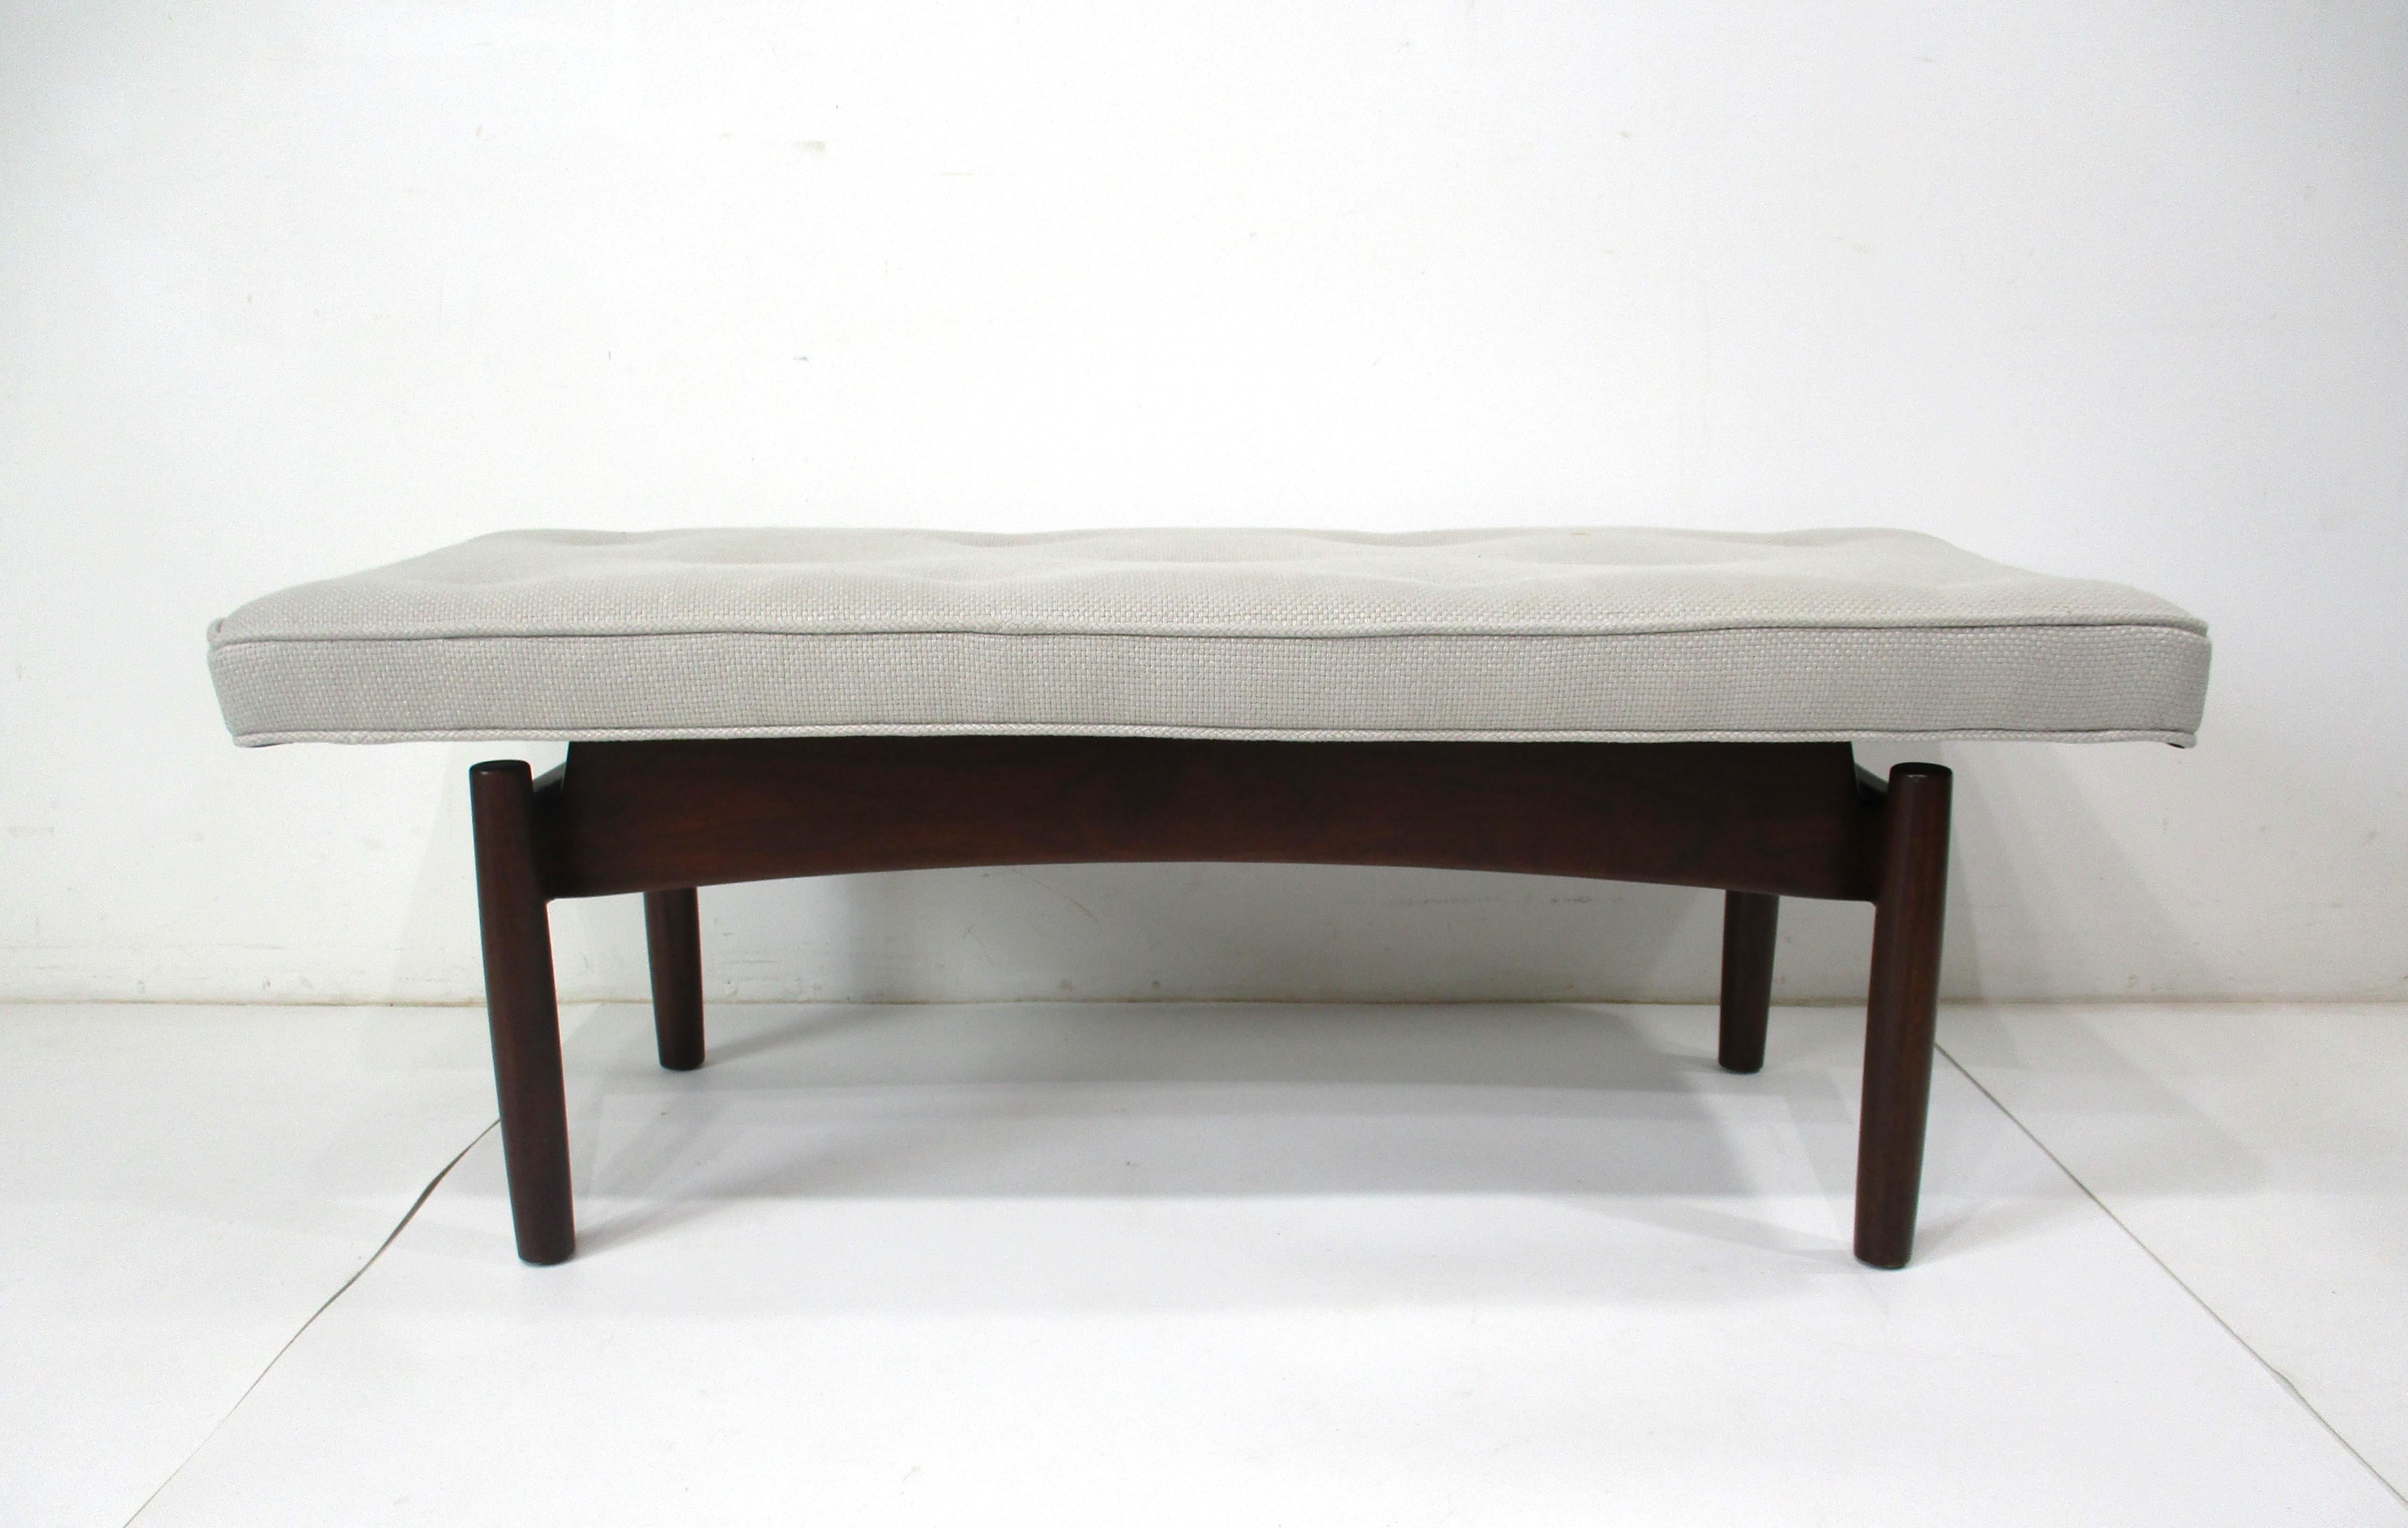 Upholstered Walnut Bench in the Style of Greta Grossman Danish Modern (A) For Sale 4